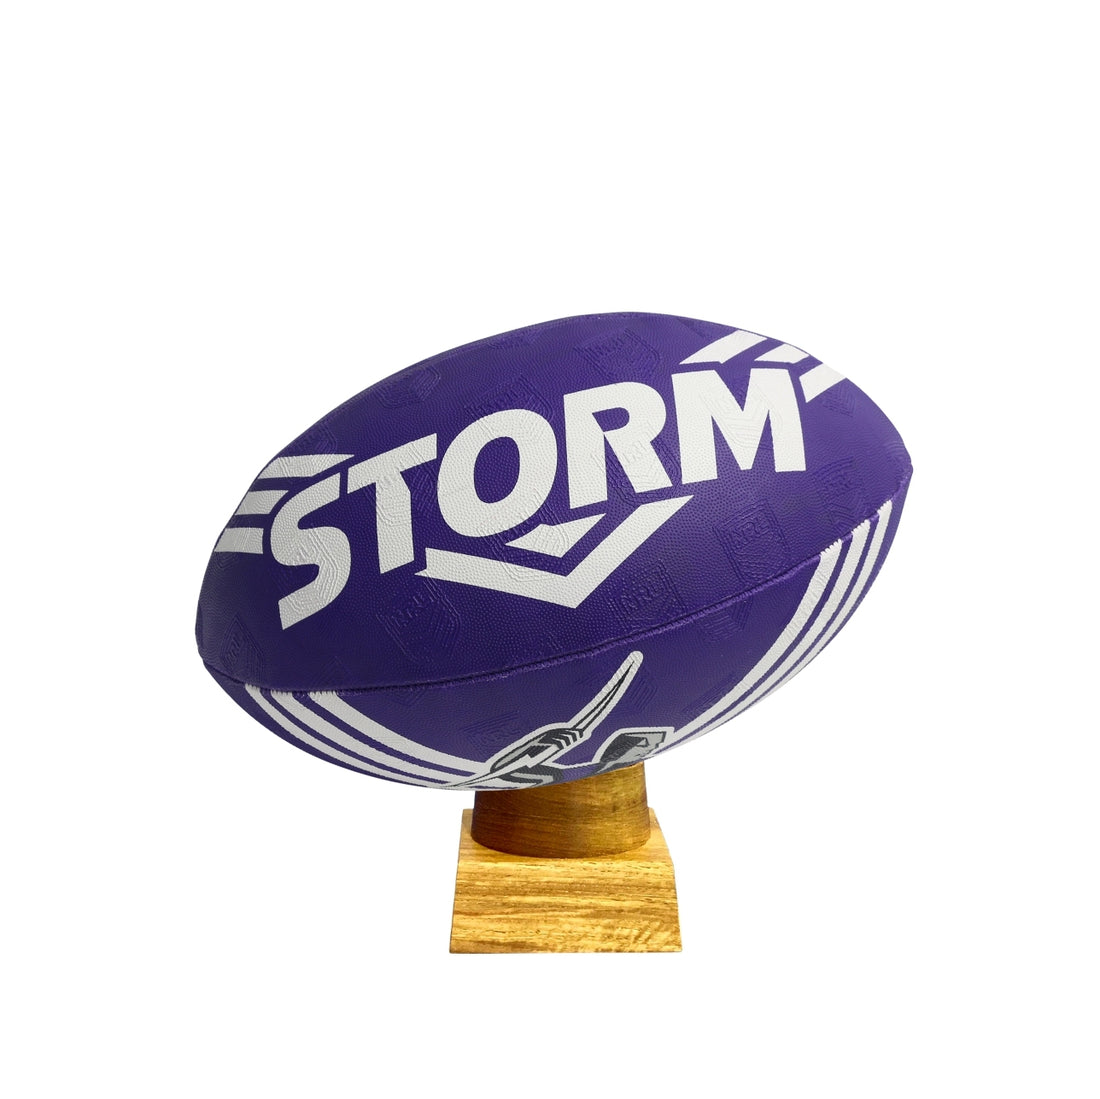 Melbourne Storm Football Urn for Ashes with personalised timber display stand